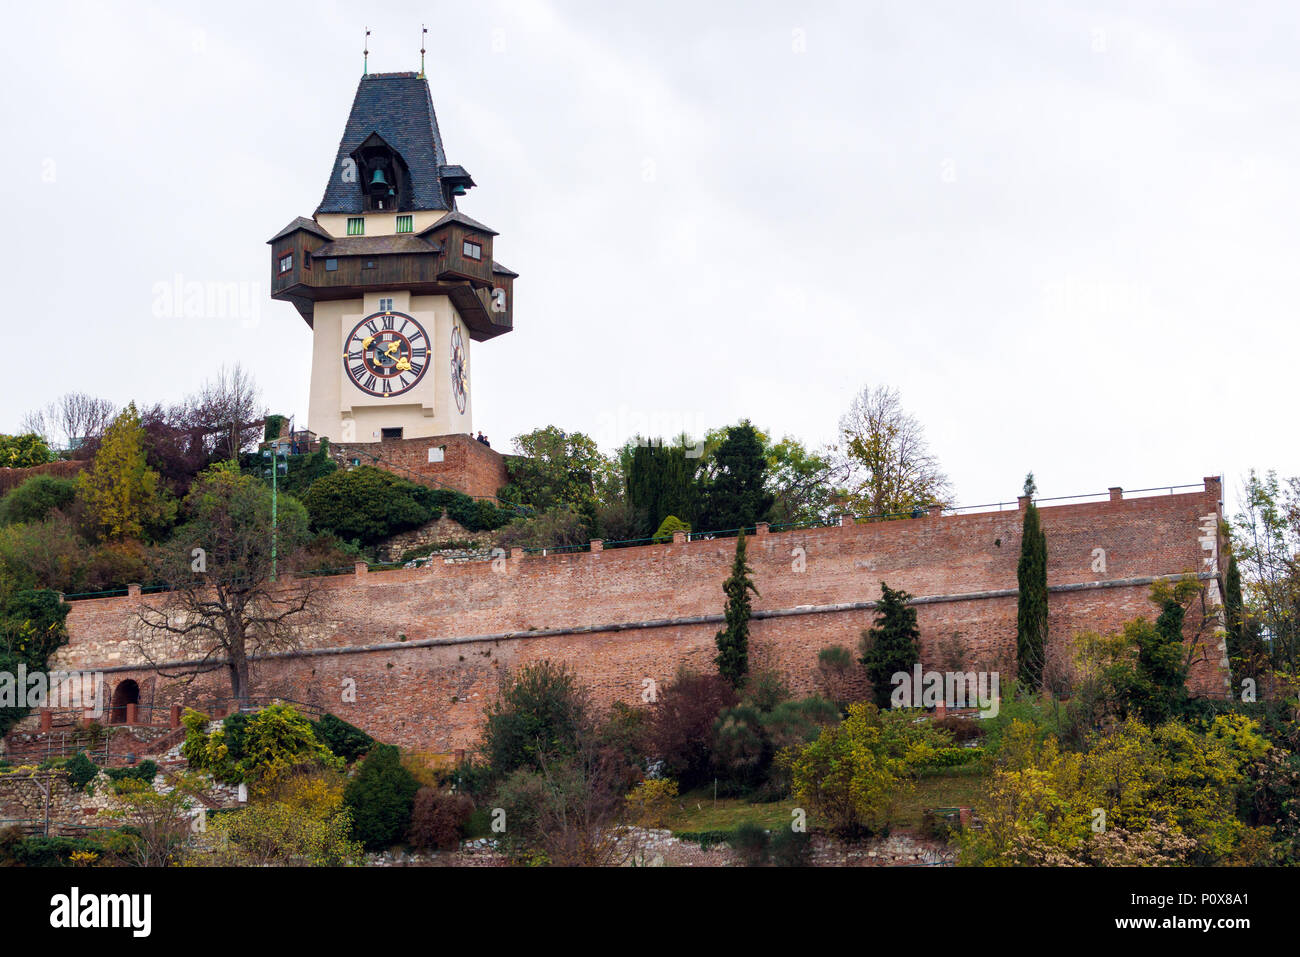 The Schlossberg or Castle Hill with the clock tower Uhrturm, Graz, Austria Stock Photo